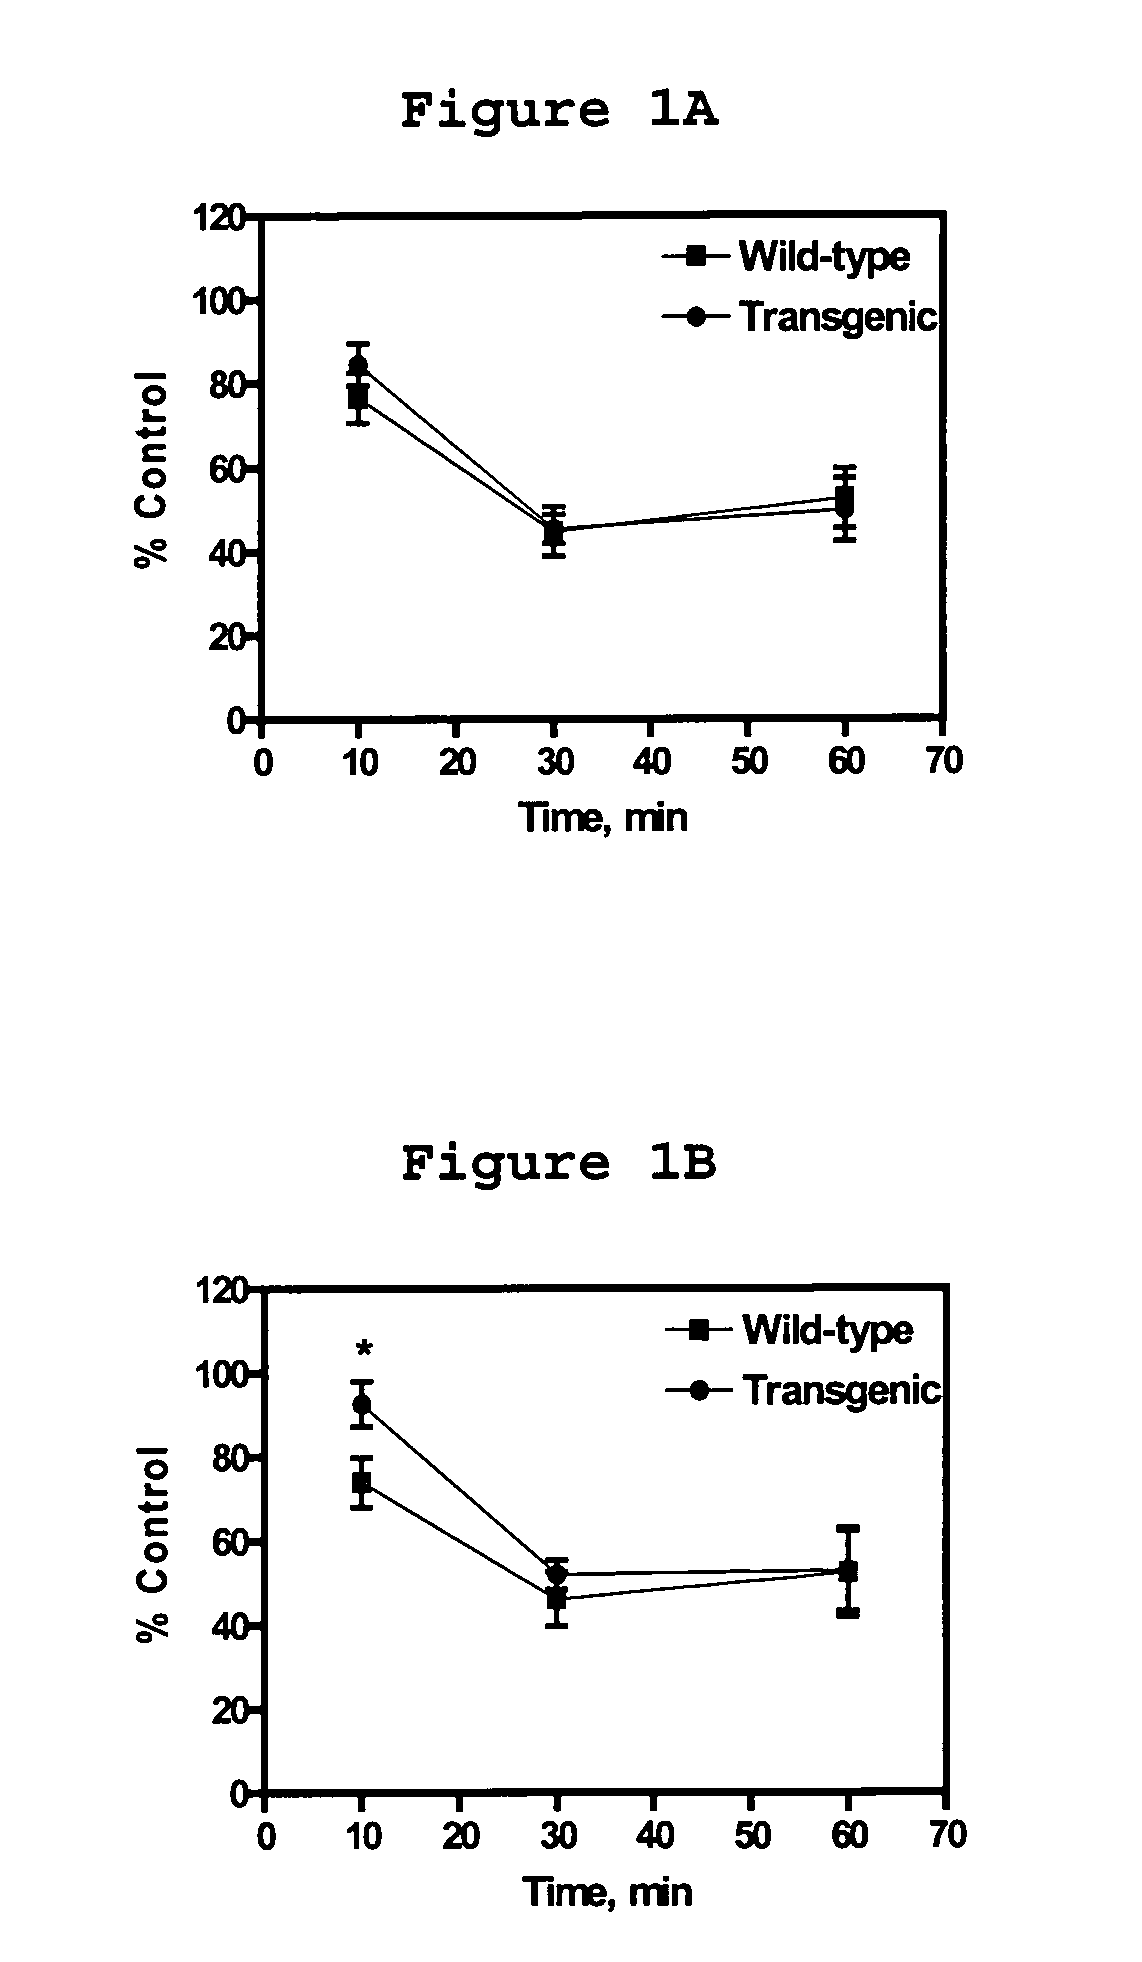 Methods and materials for treating, detecting, and reducing the risk of developing Alzheimer's Disease